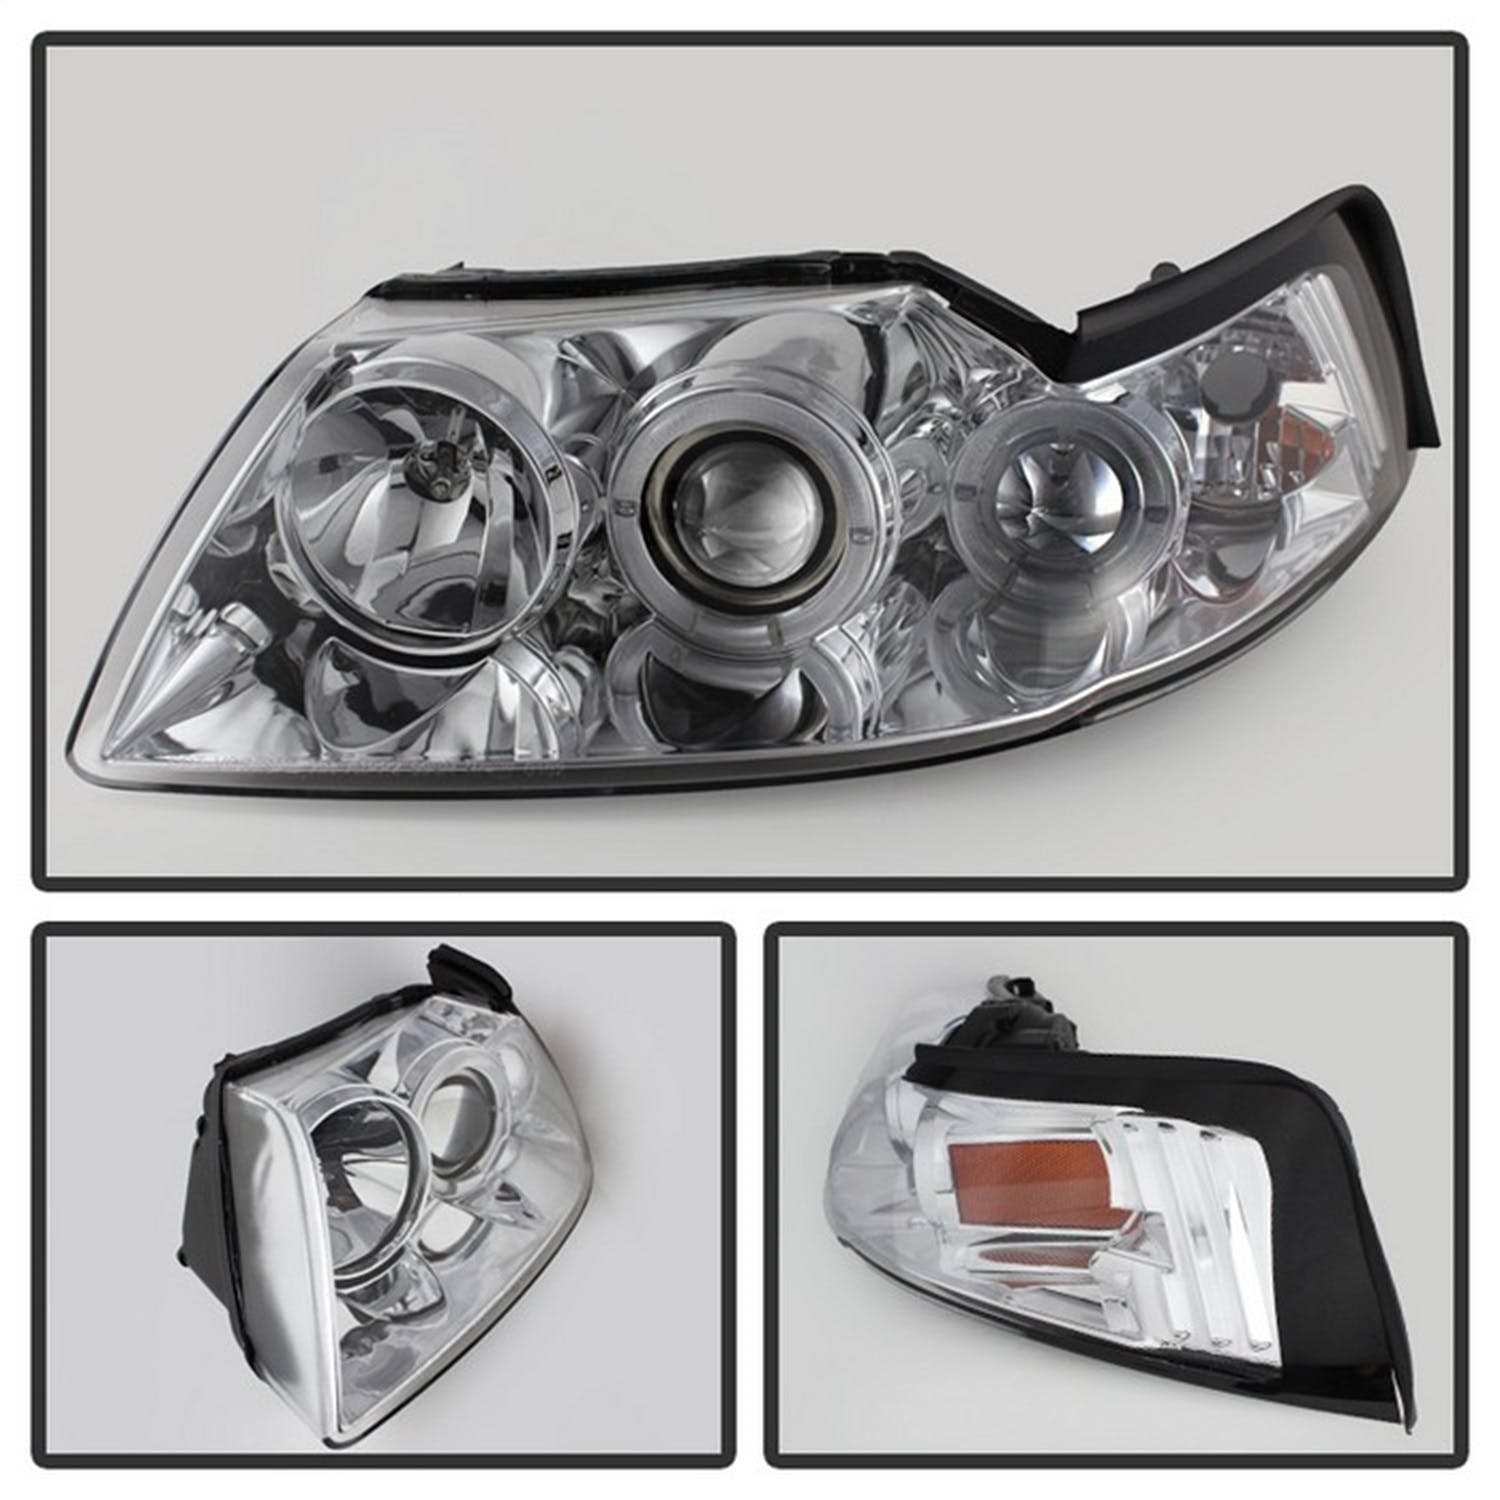 Spyder Auto 5010452 (Spyder) Ford Mustang 99-04 Projector Headlights-LED Halo-Chrome-High H1 (Includ